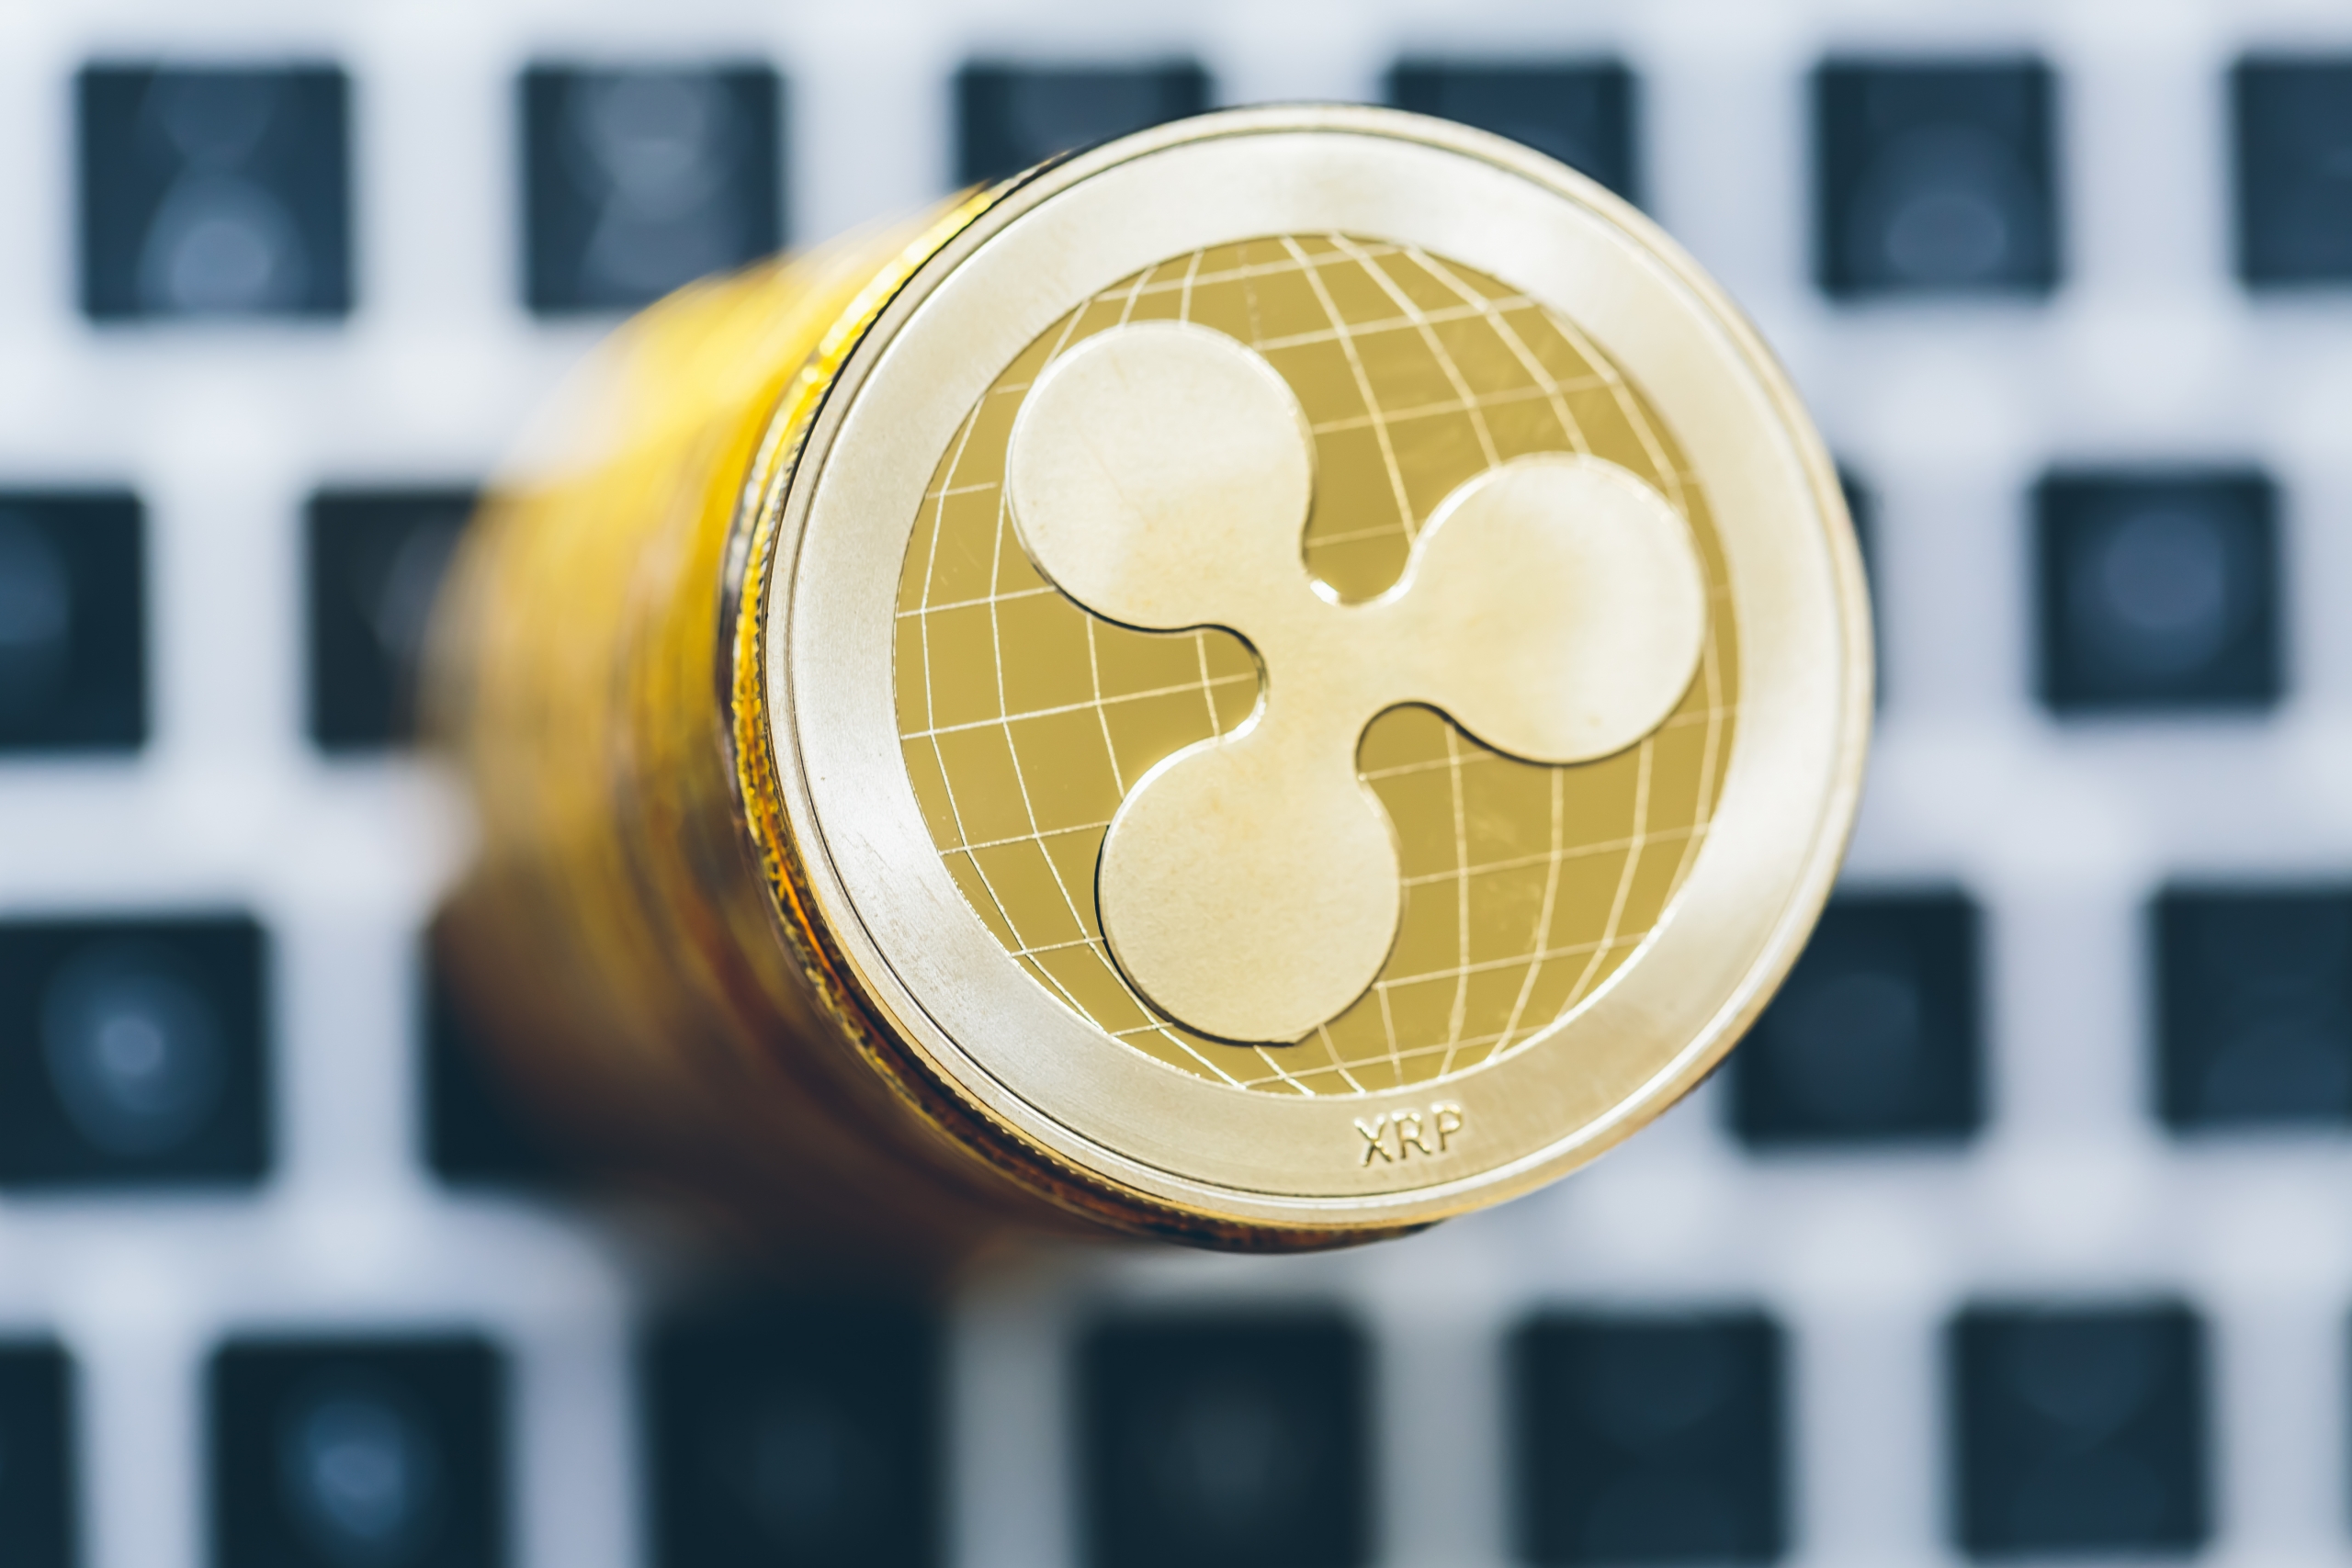 Top 3 XRP Developments You Should Be Aware Of That Could Boost Price